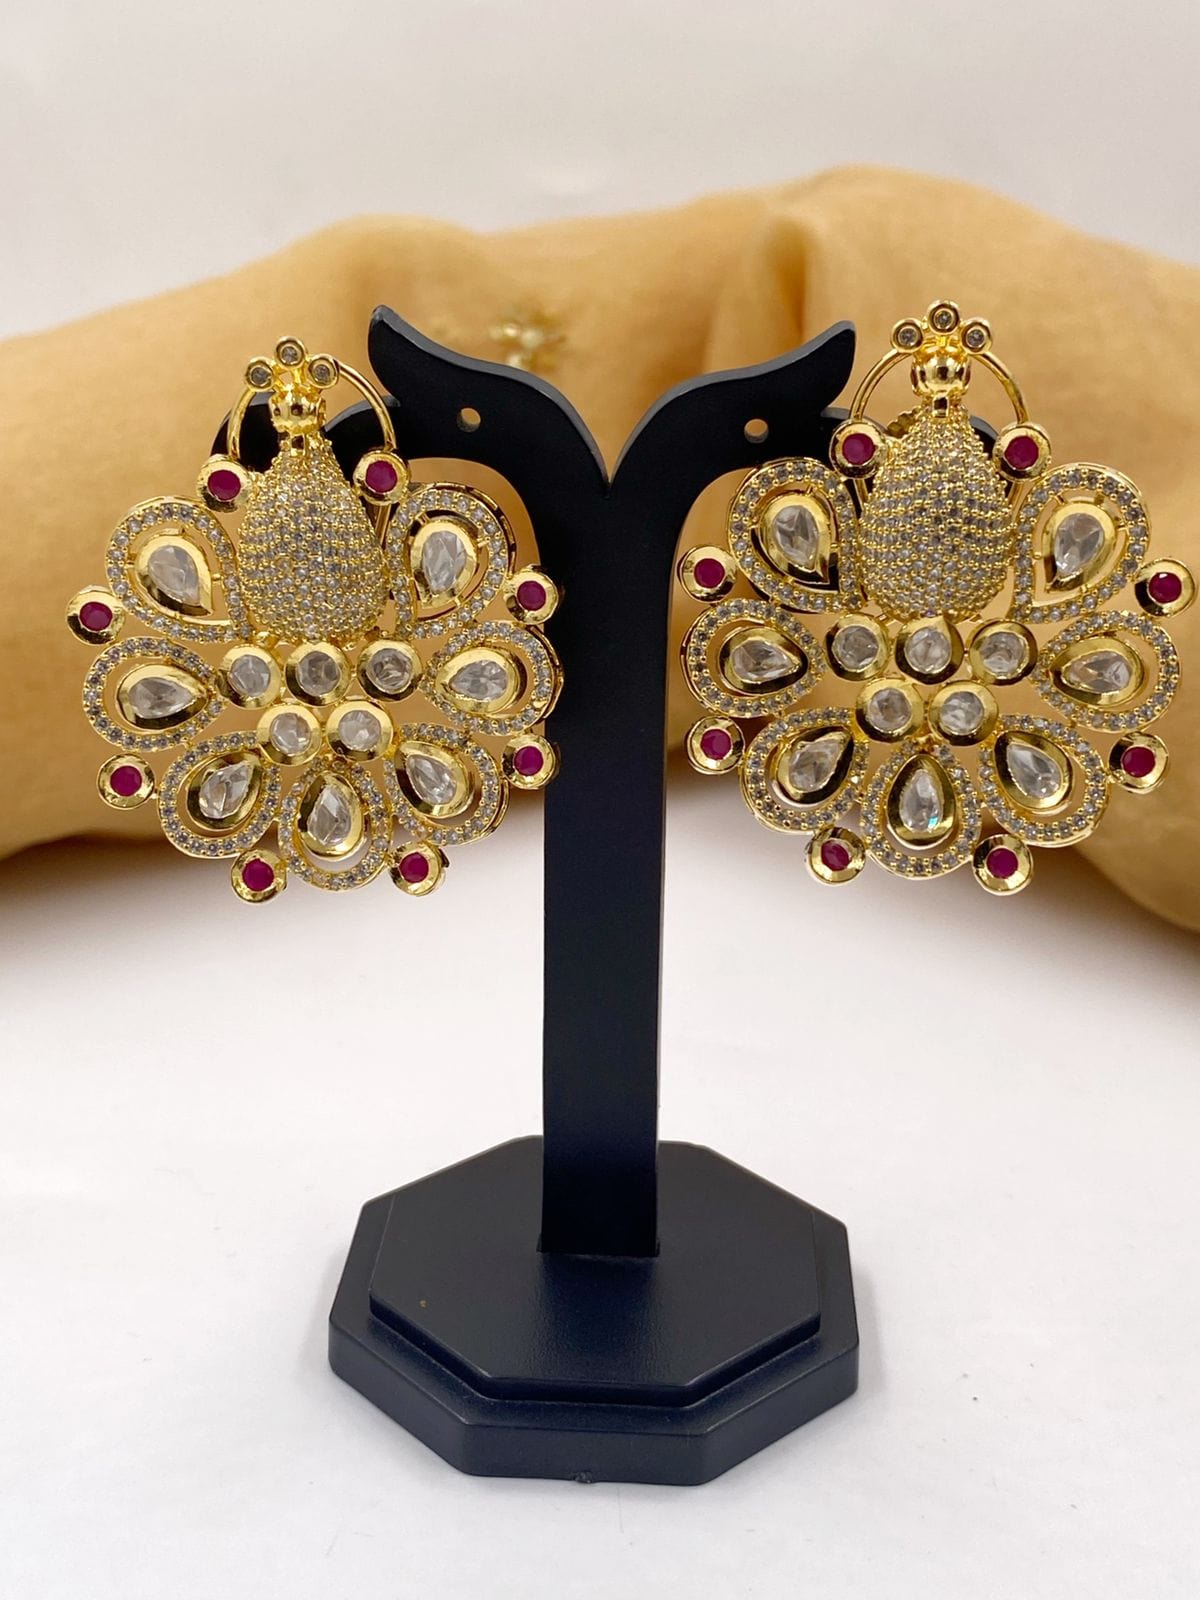 Designer Gold Plated Peacock Design AD Earrings For Ladies By Gehna Shop Stud Earrings